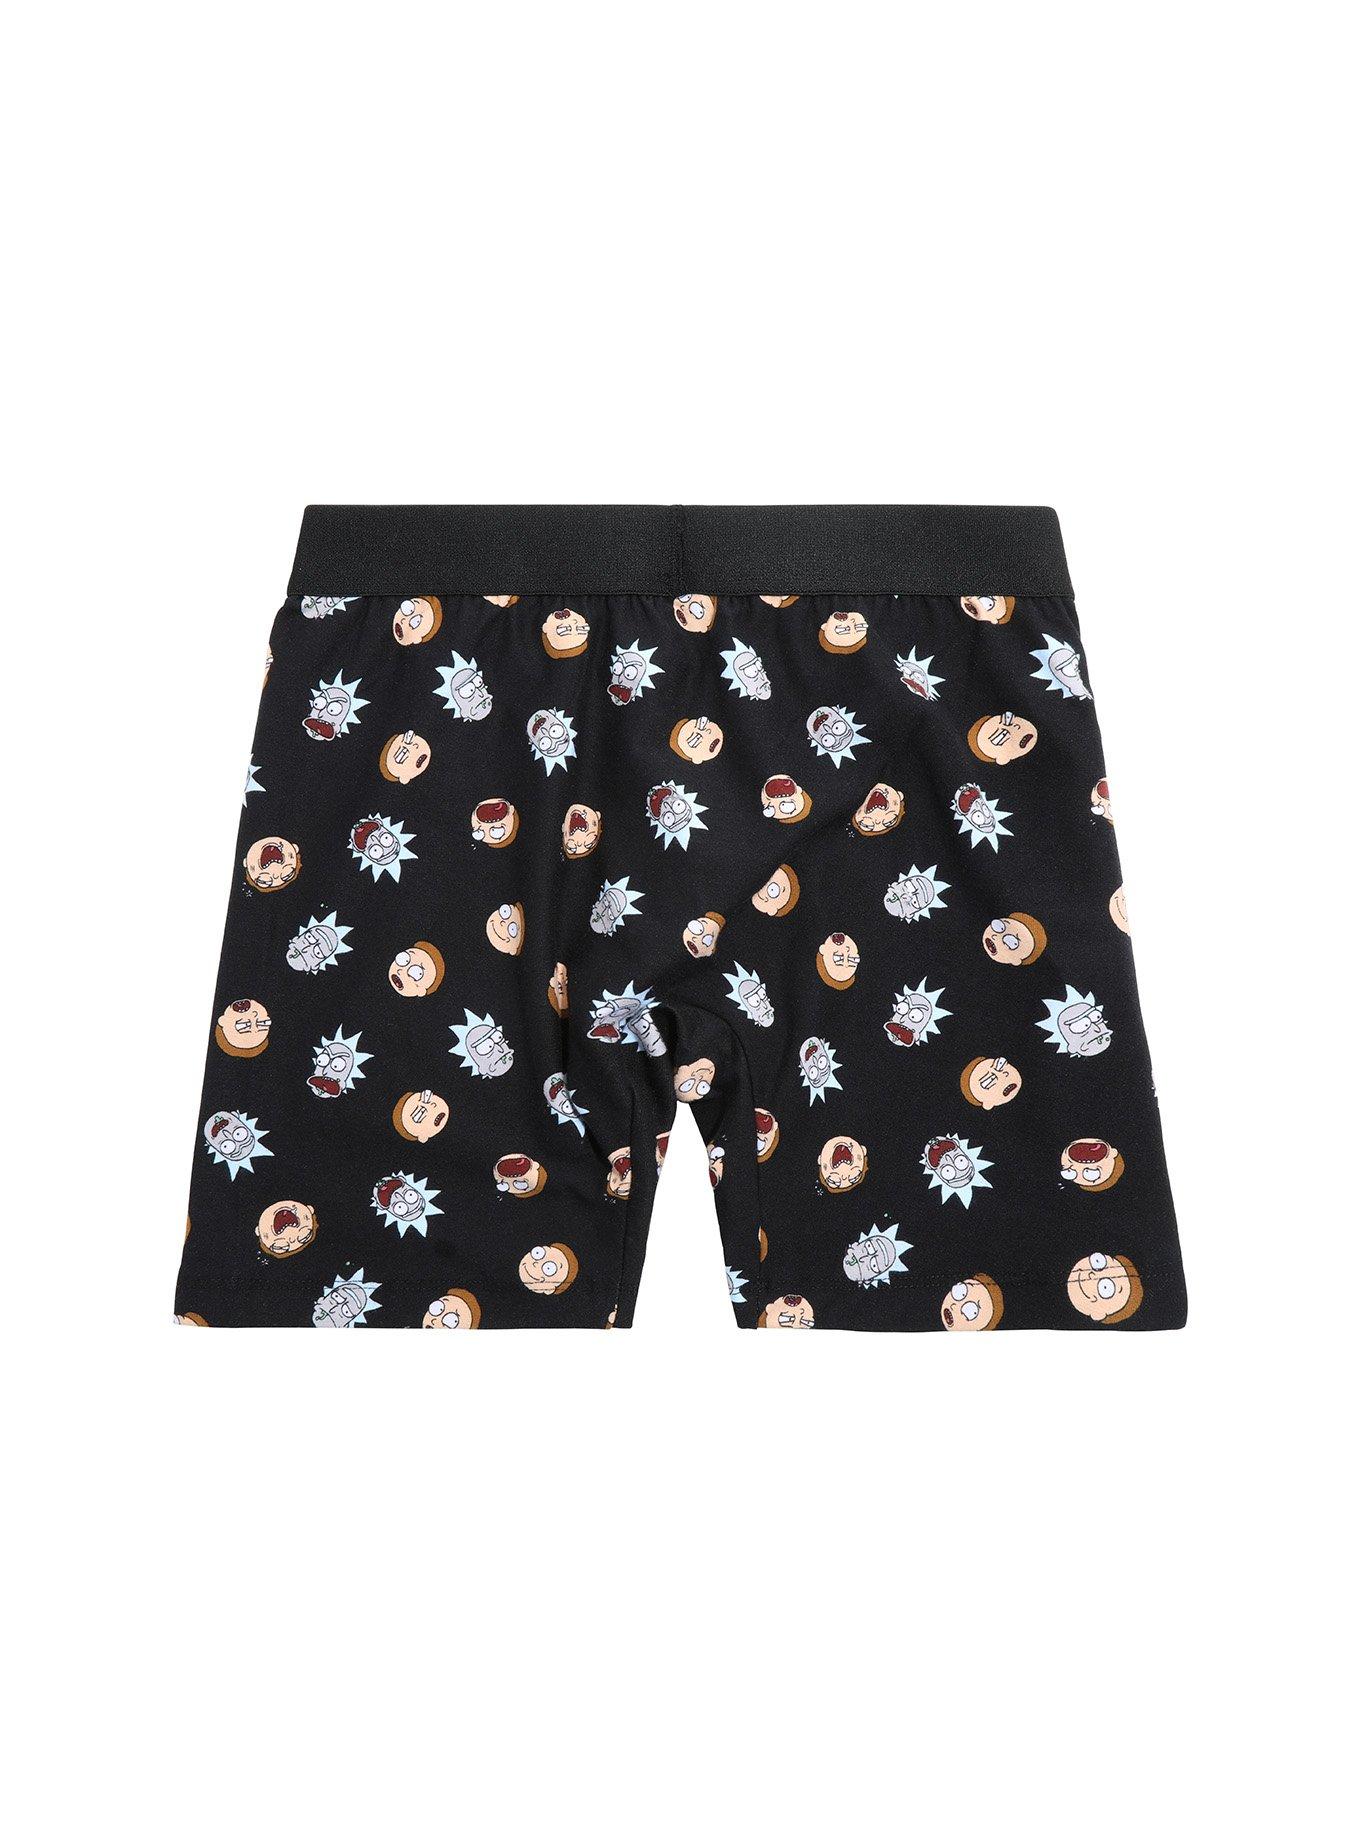 Rick And Morty Heads Toss Print Boxer Briefs, MULTI, alternate